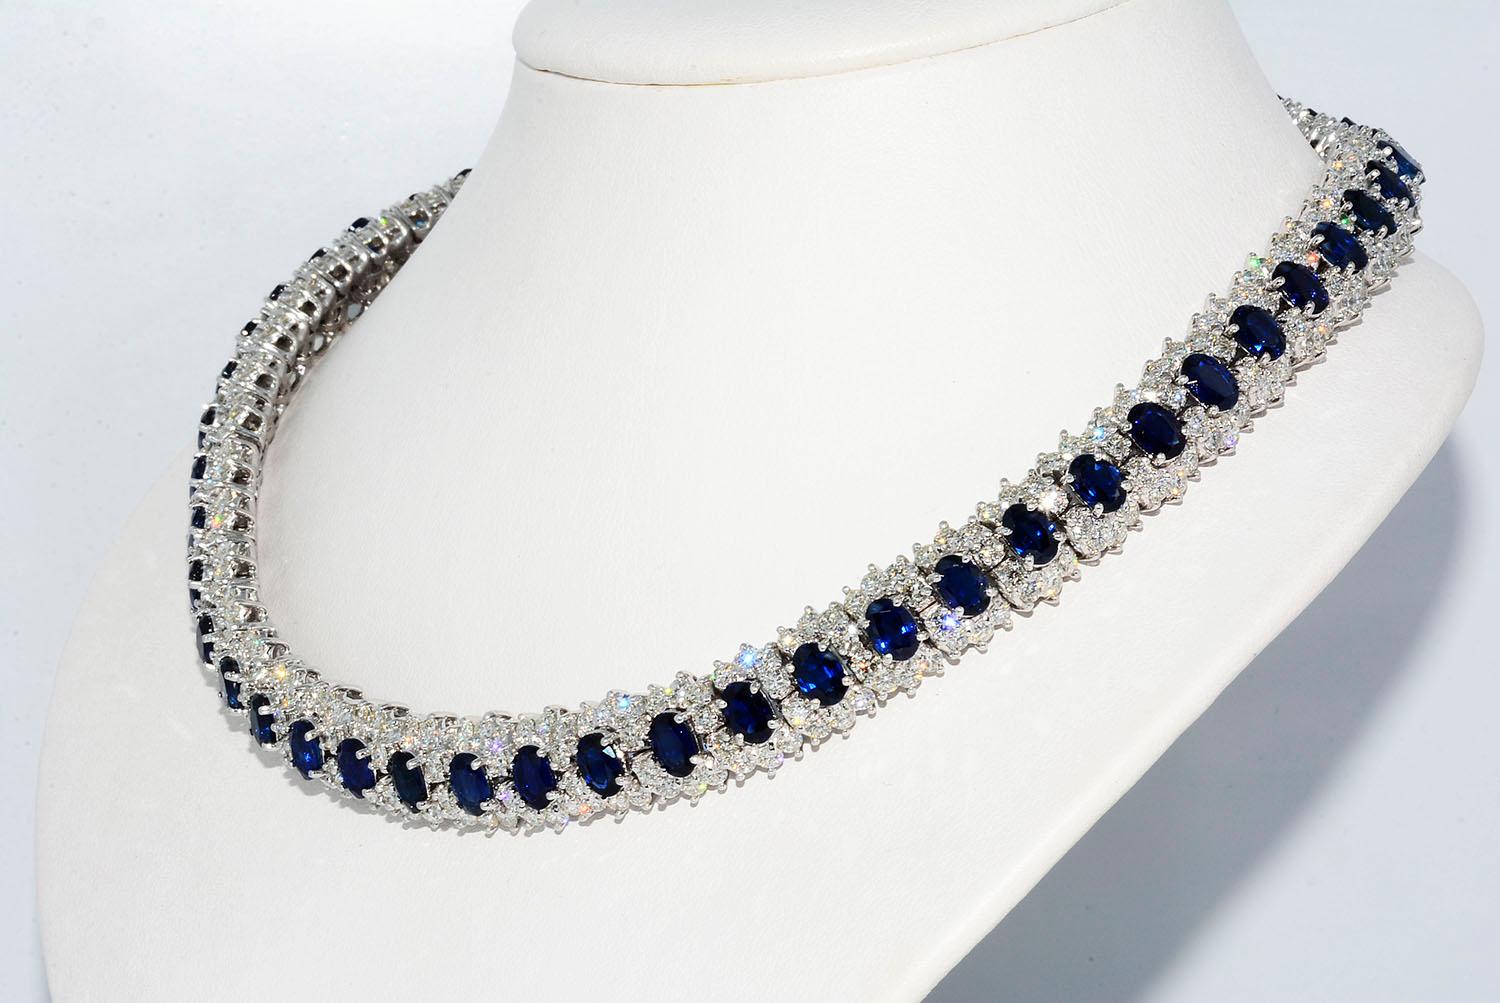 Hammerman Brothers Oval Sapphire and Diamond Necklace Platinum

Oval Blue Sapphires Heat Only 21.75 ct
Round Diamonds 21.00 ct F VS1
Platinum
Length 17 Inches